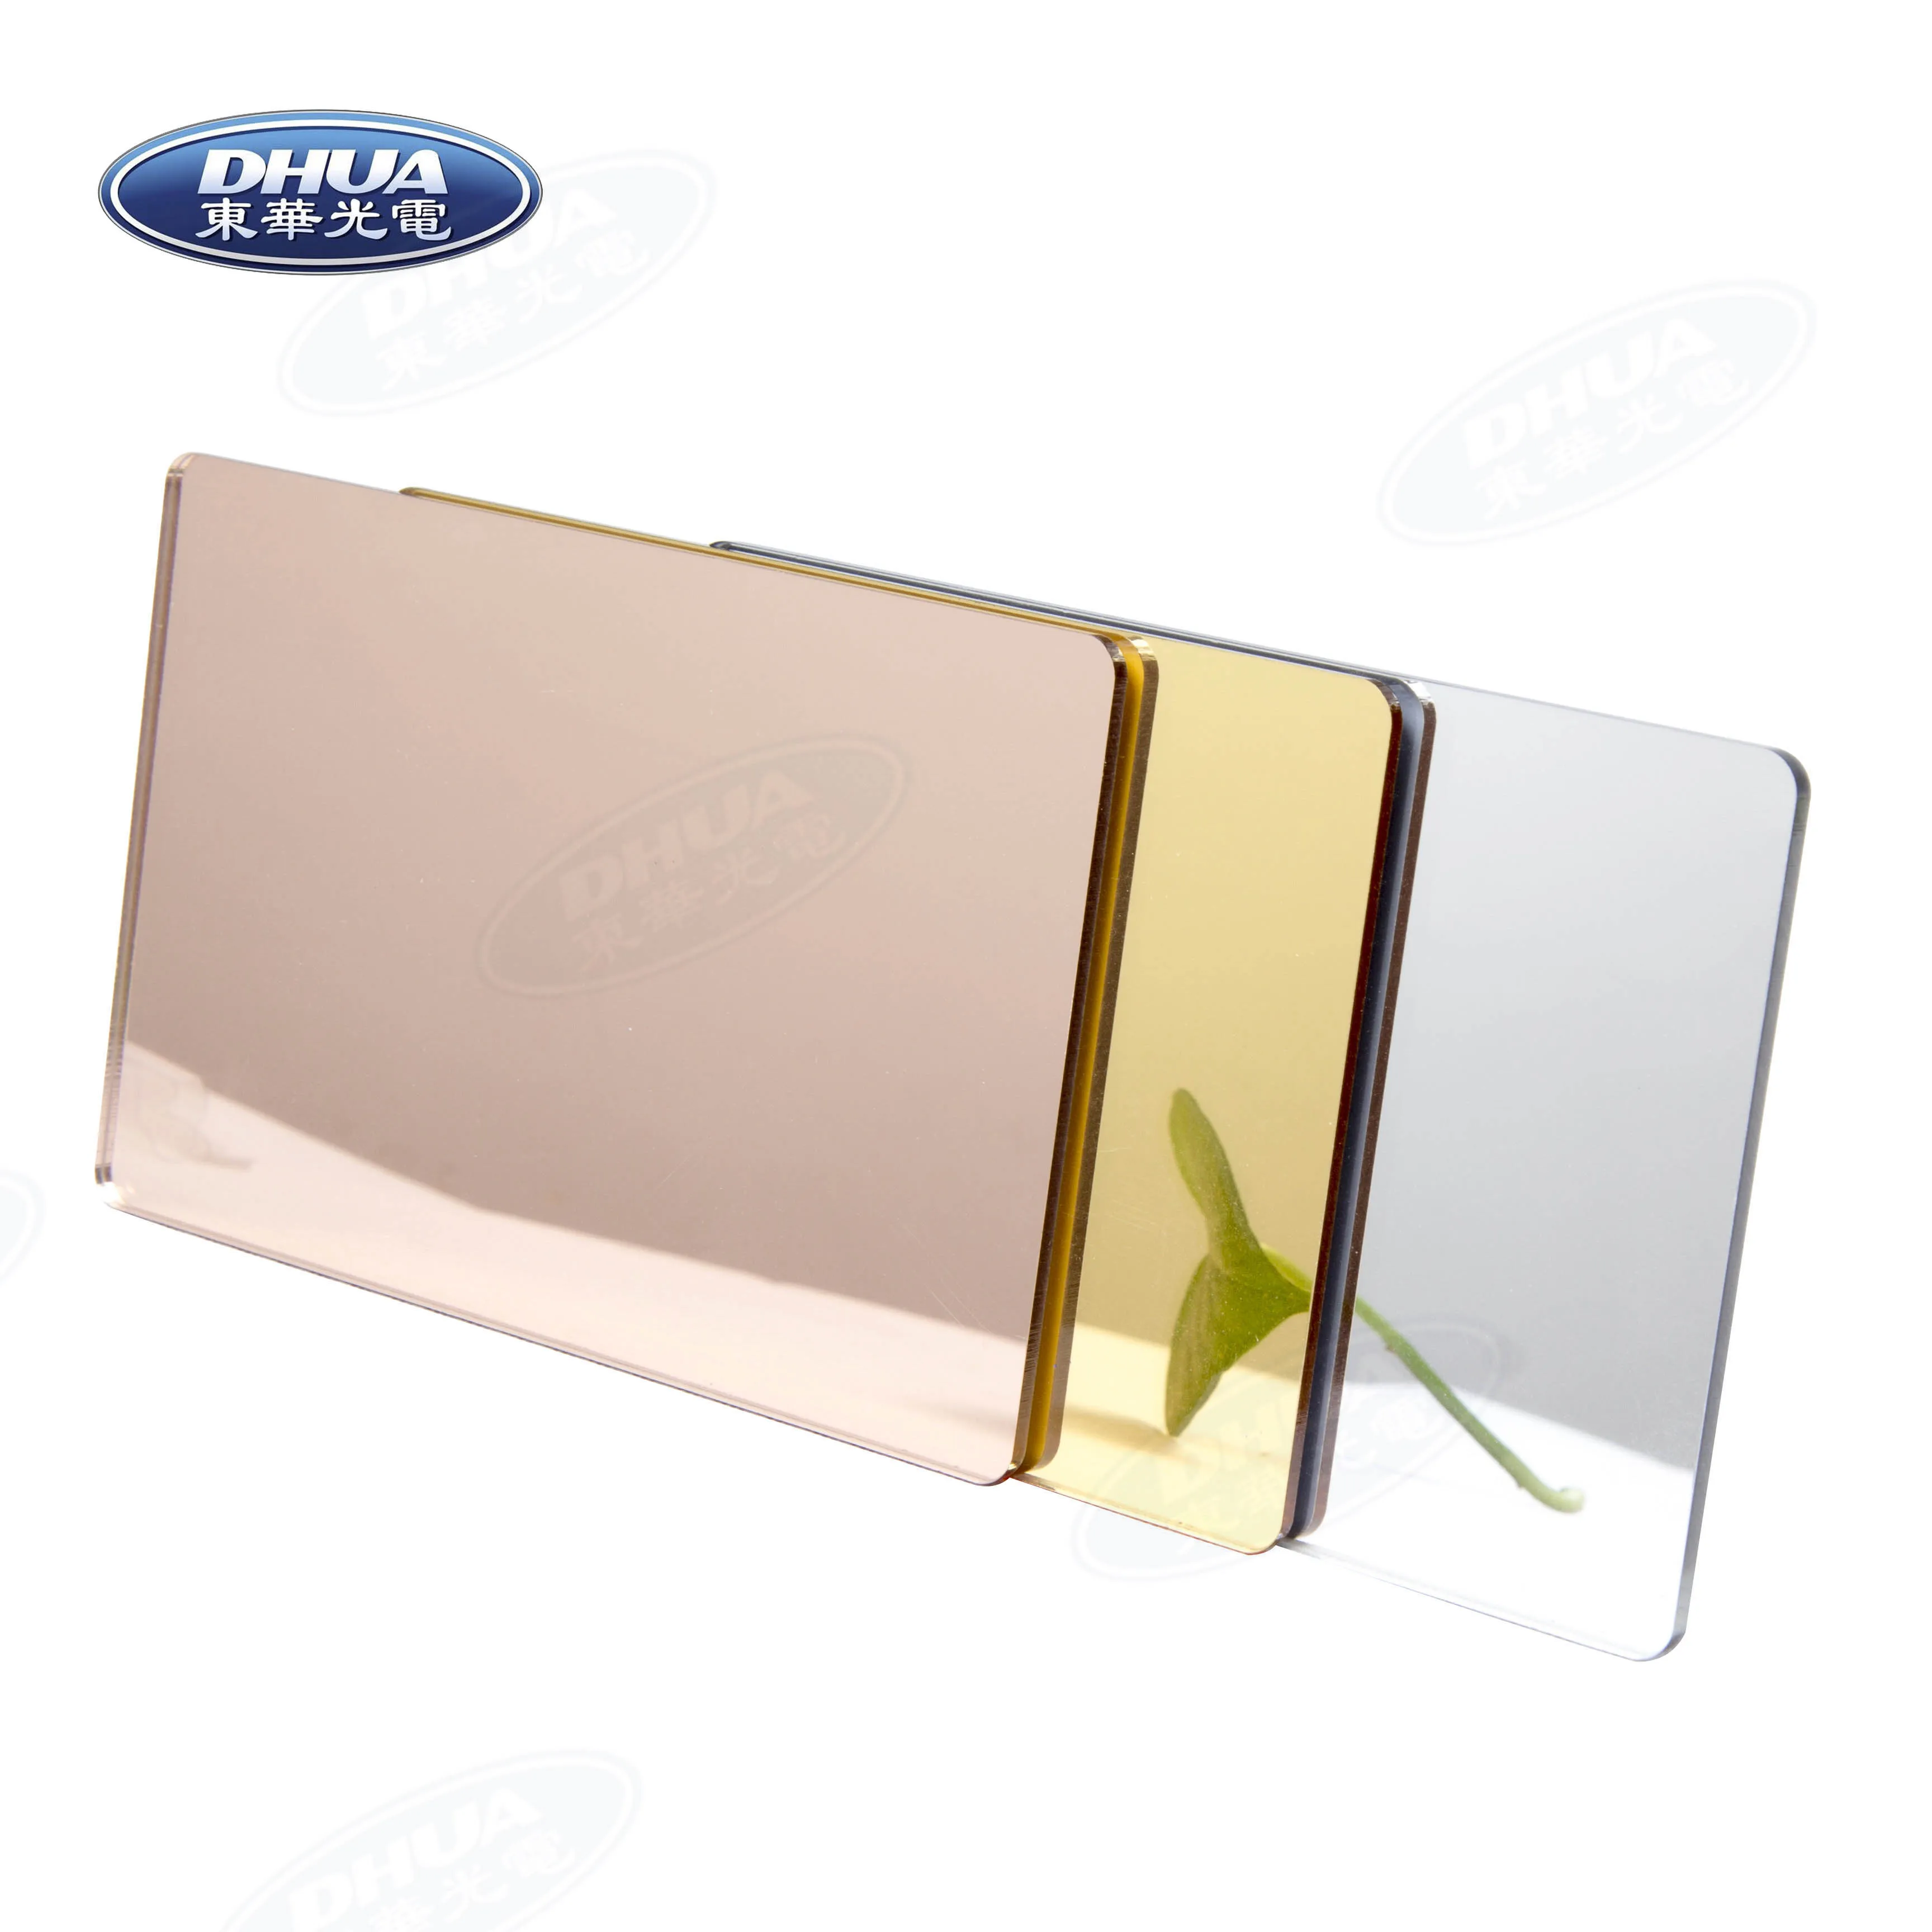 News - Which Kind of Plastic Mirrors Can Replace Glass Mirrors Without  deformation in the case of large areas?